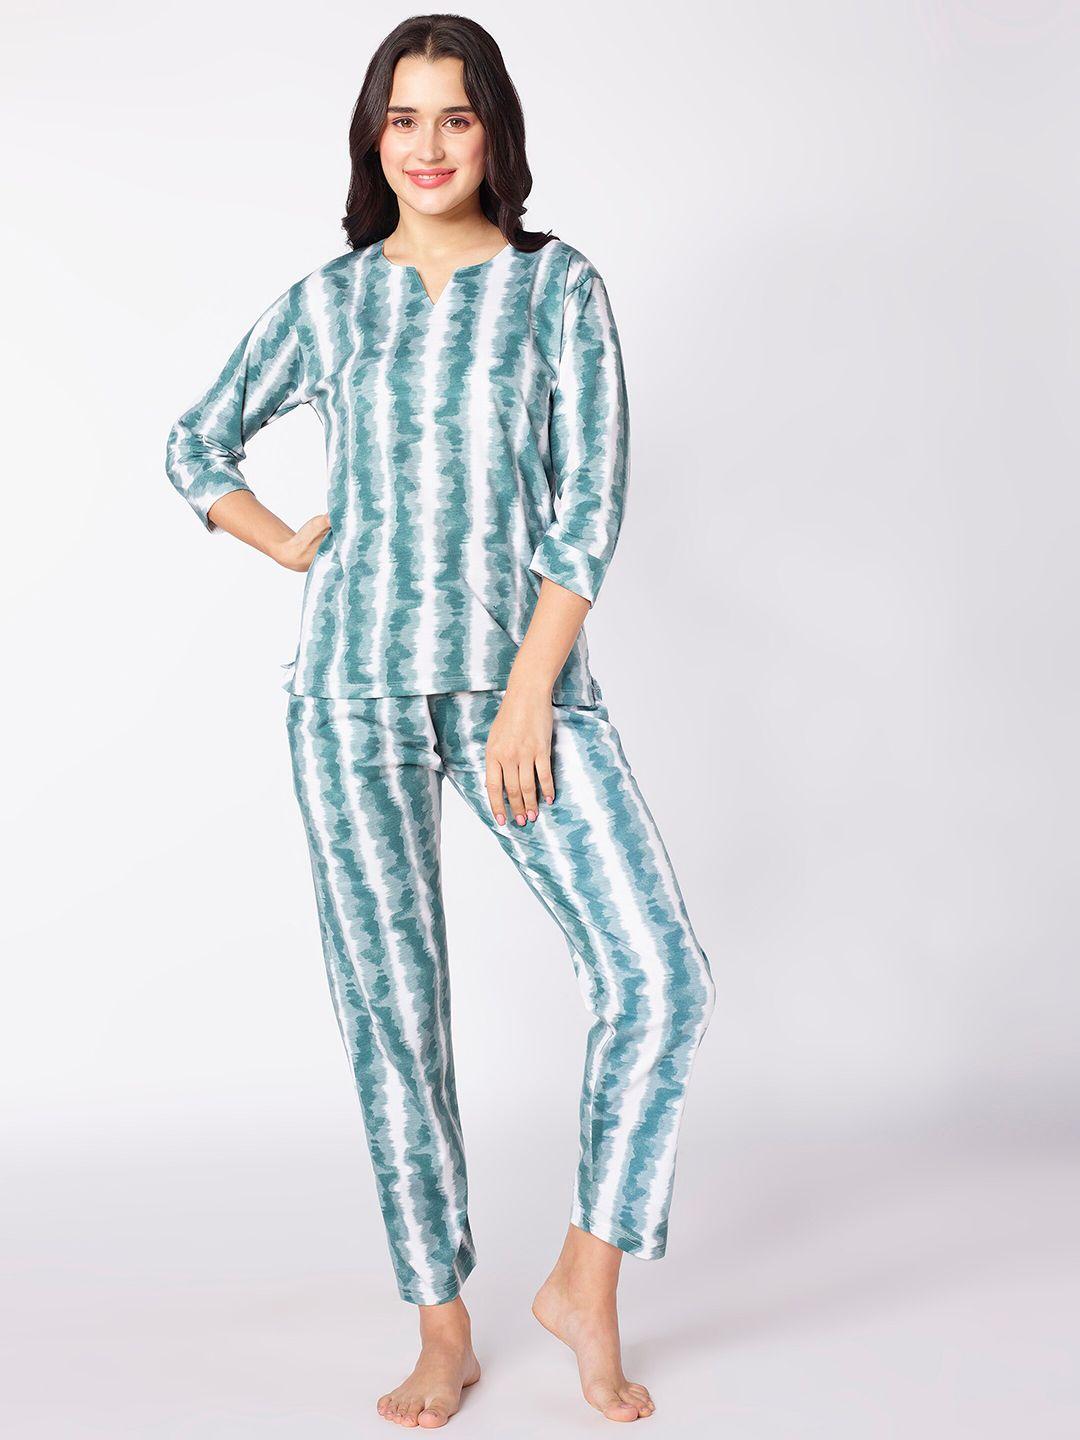 beebelle green & white tie and dye printed night suit